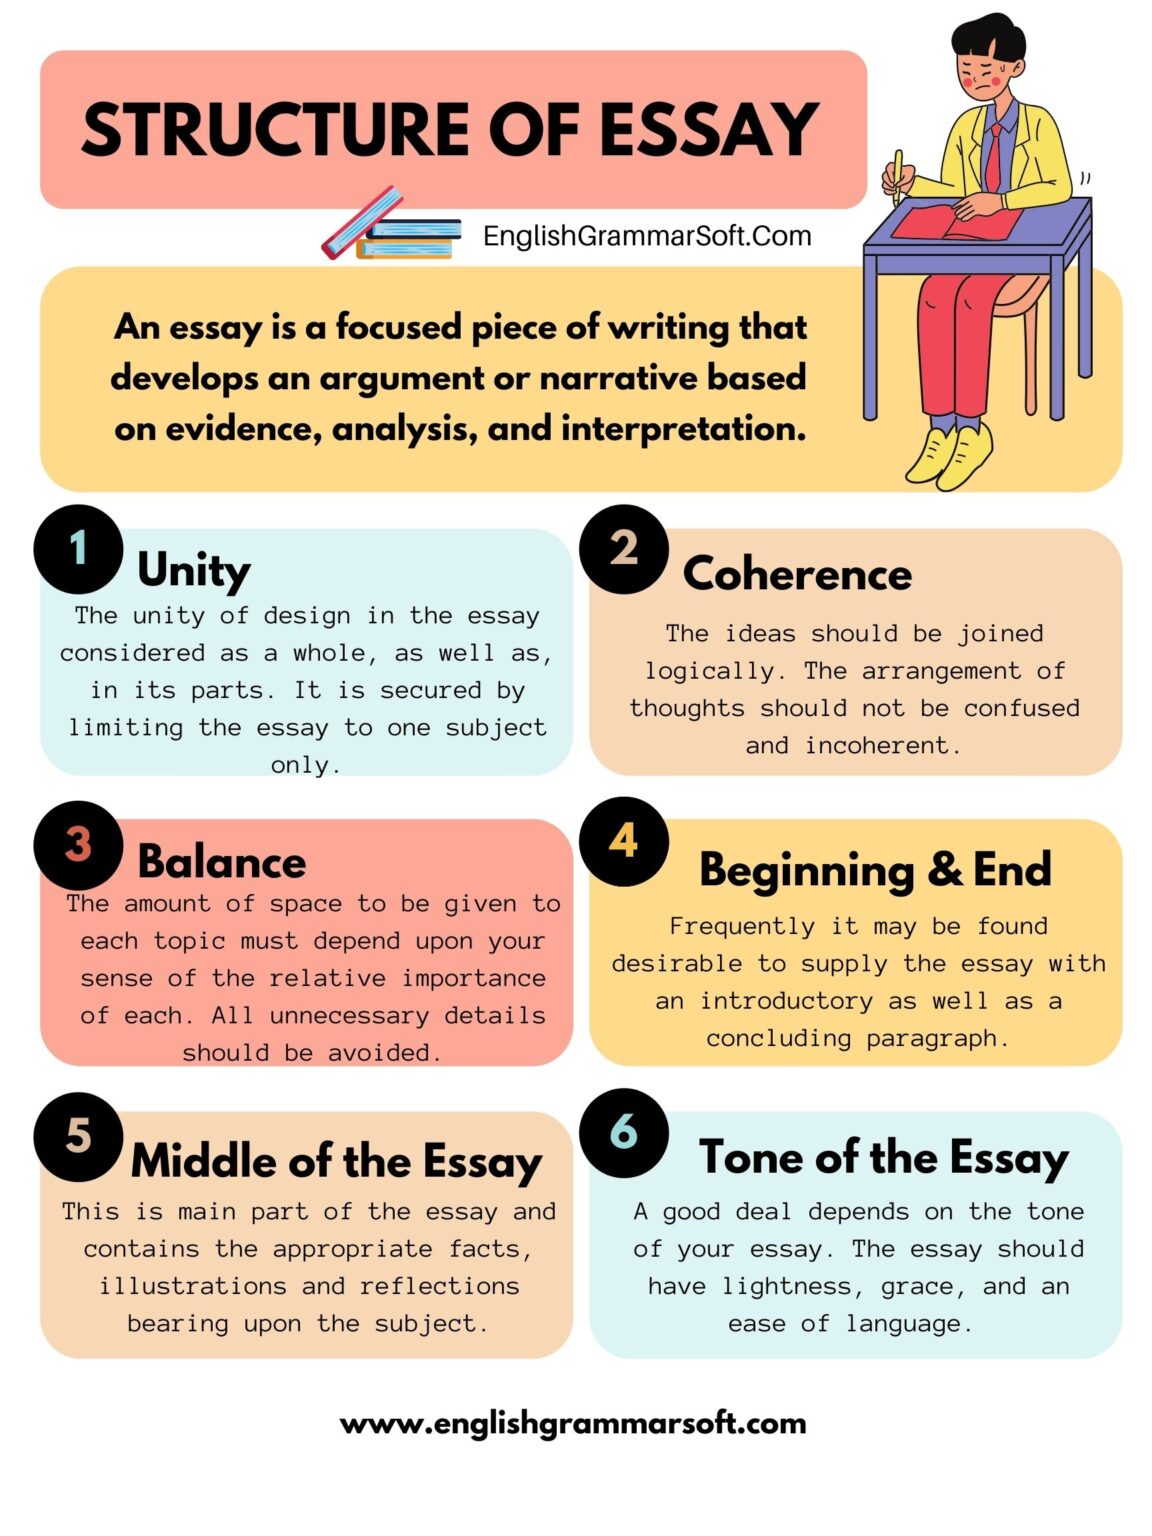 general structure of an essay